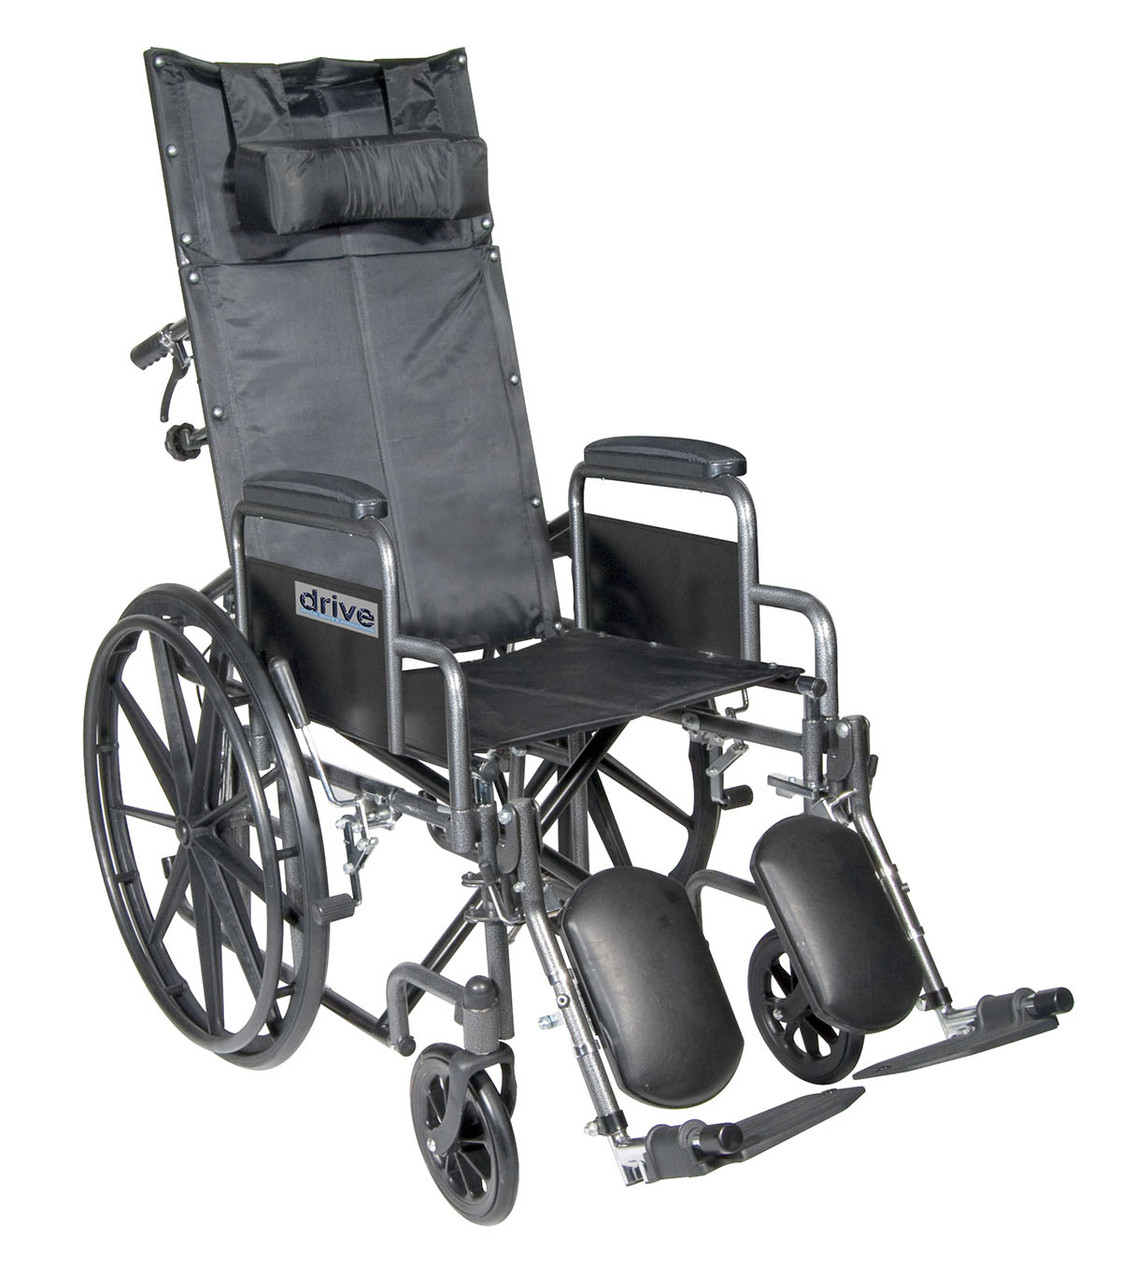 https://cdn11.bigcommerce.com/s-13ttxa/images/stencil/1280x1280/products/22135/25389/Drive_Silver_Sport_Reclining_Wheelchair_-_Elevating_Leg_Rests_Detachable_Desk_Arms_20_Seat__55035.1684258886.jpg?c=2